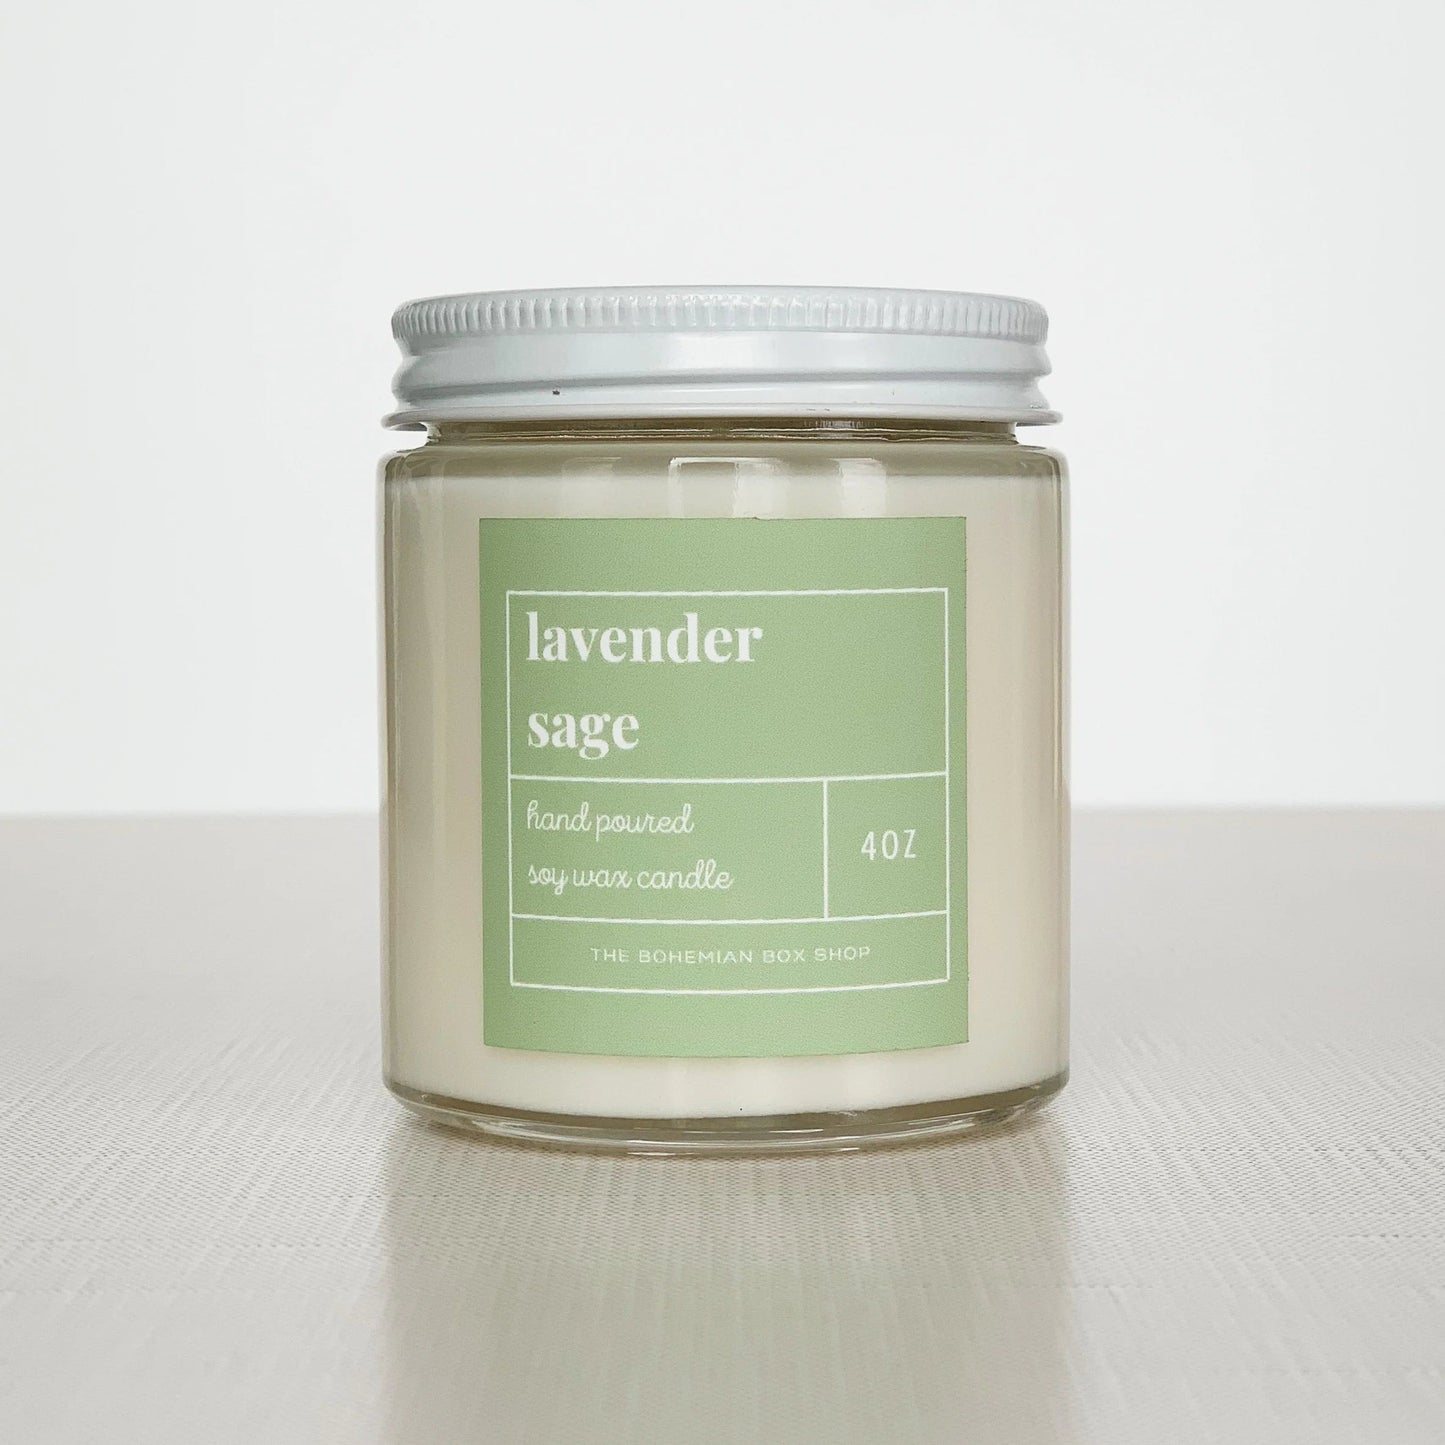 4 ounce lavender sage soy candle with  green label, clear jar, and white lid.